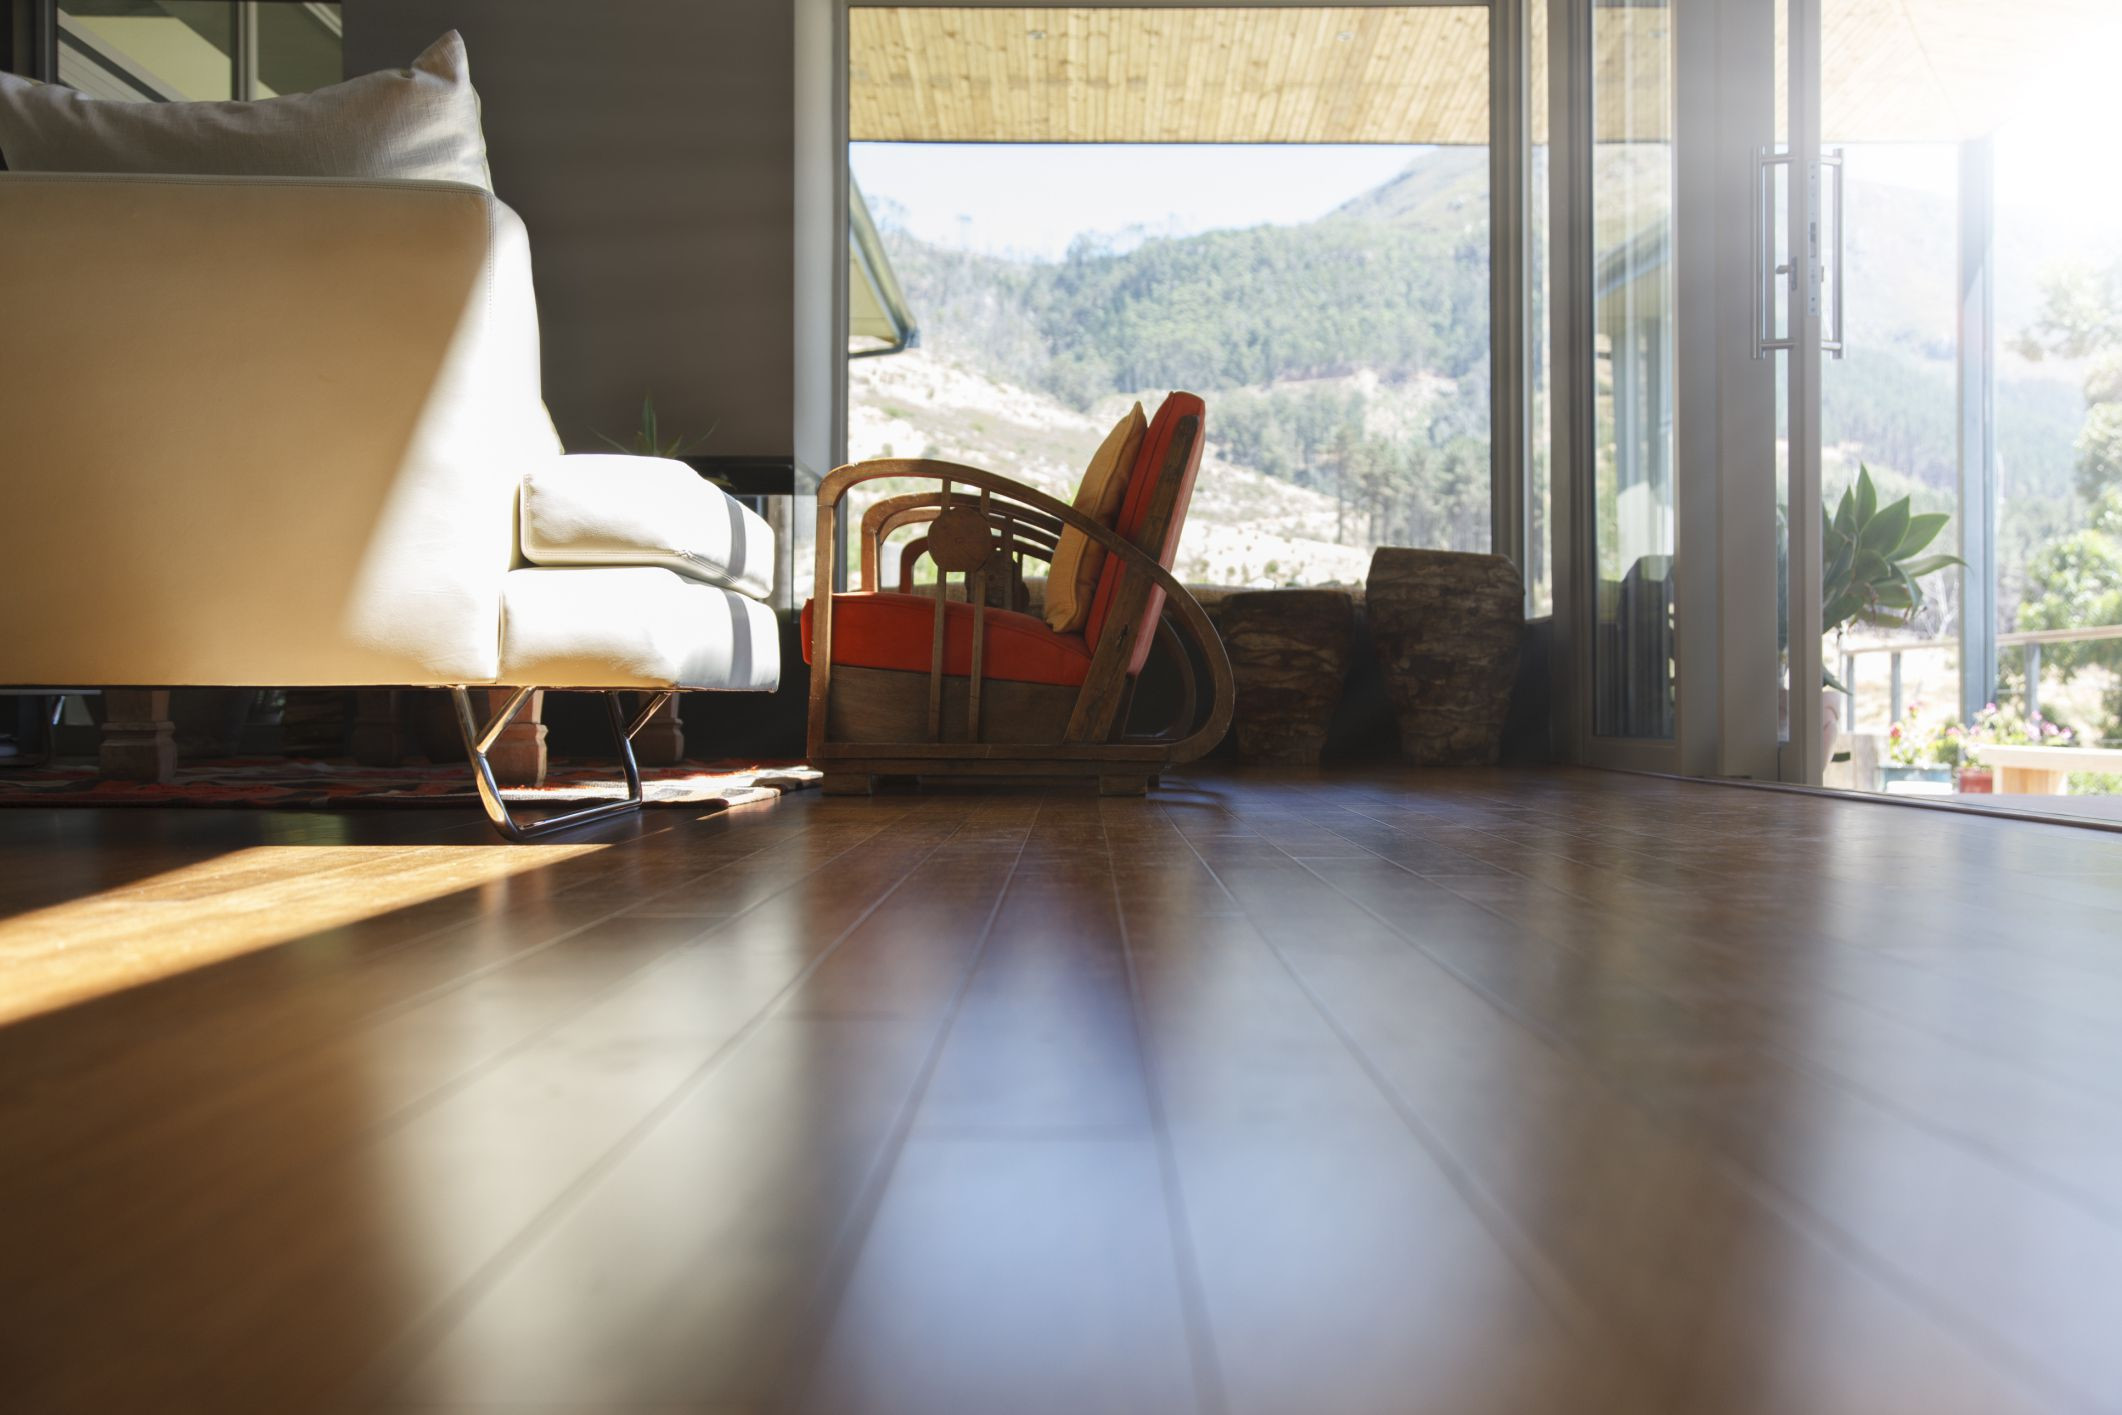 refinishing engineered hardwood floors cost of pros and cons of bellawood flooring from lumber liquidators in exotic hardwood flooring 525439899 56a49d3a3df78cf77283453d